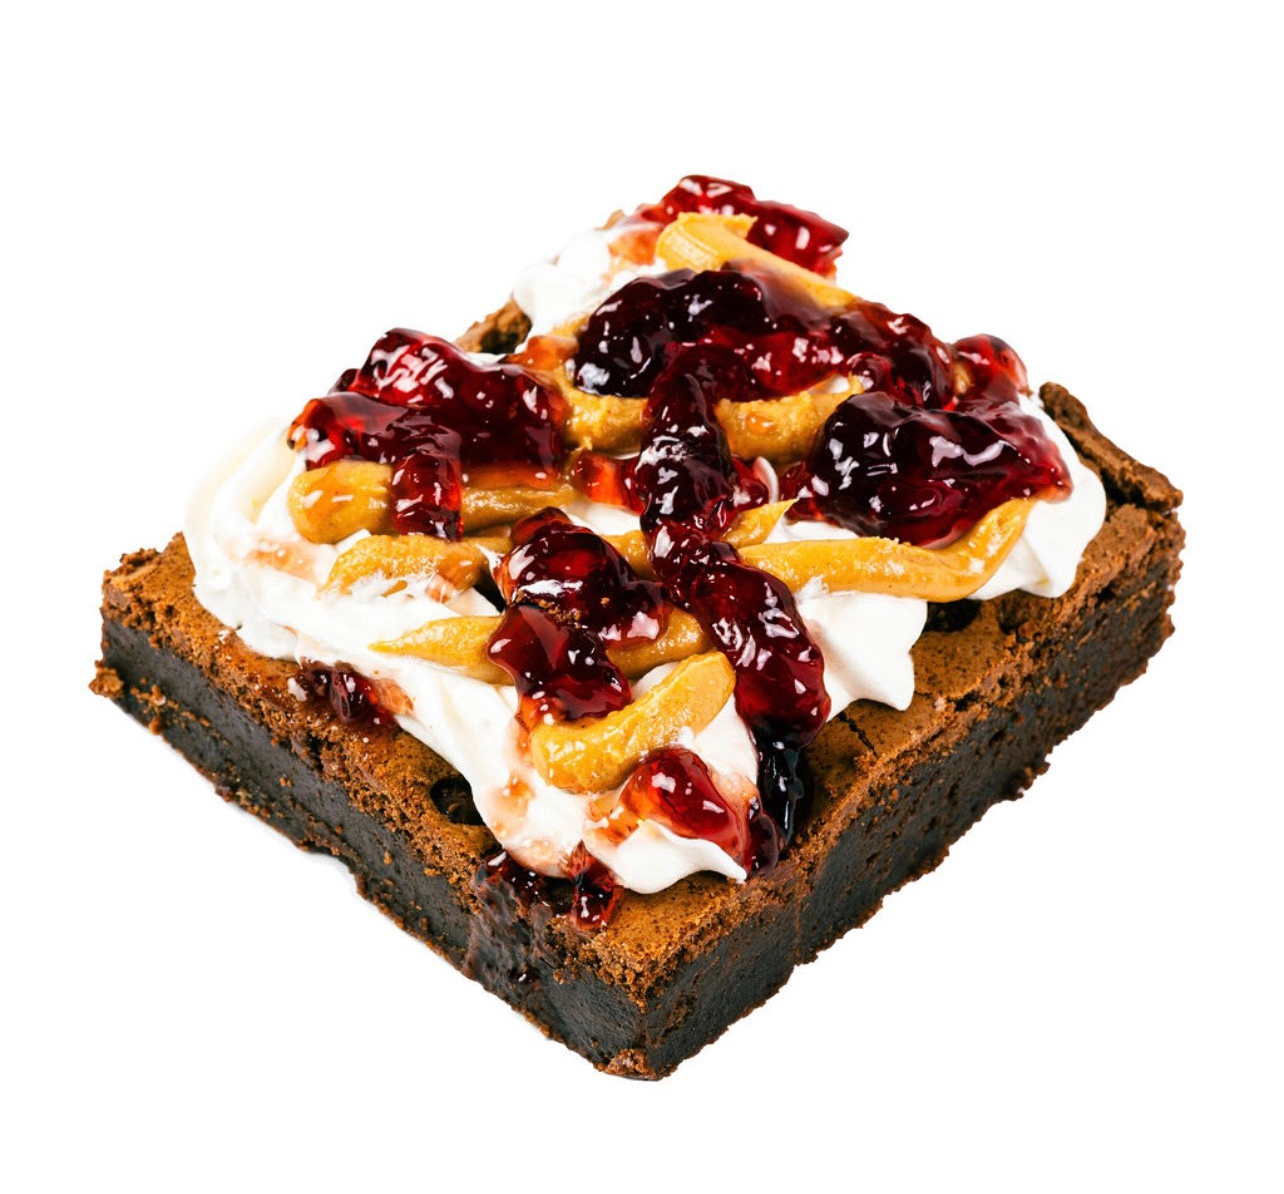 Peanut Butter & Jelly Brownie